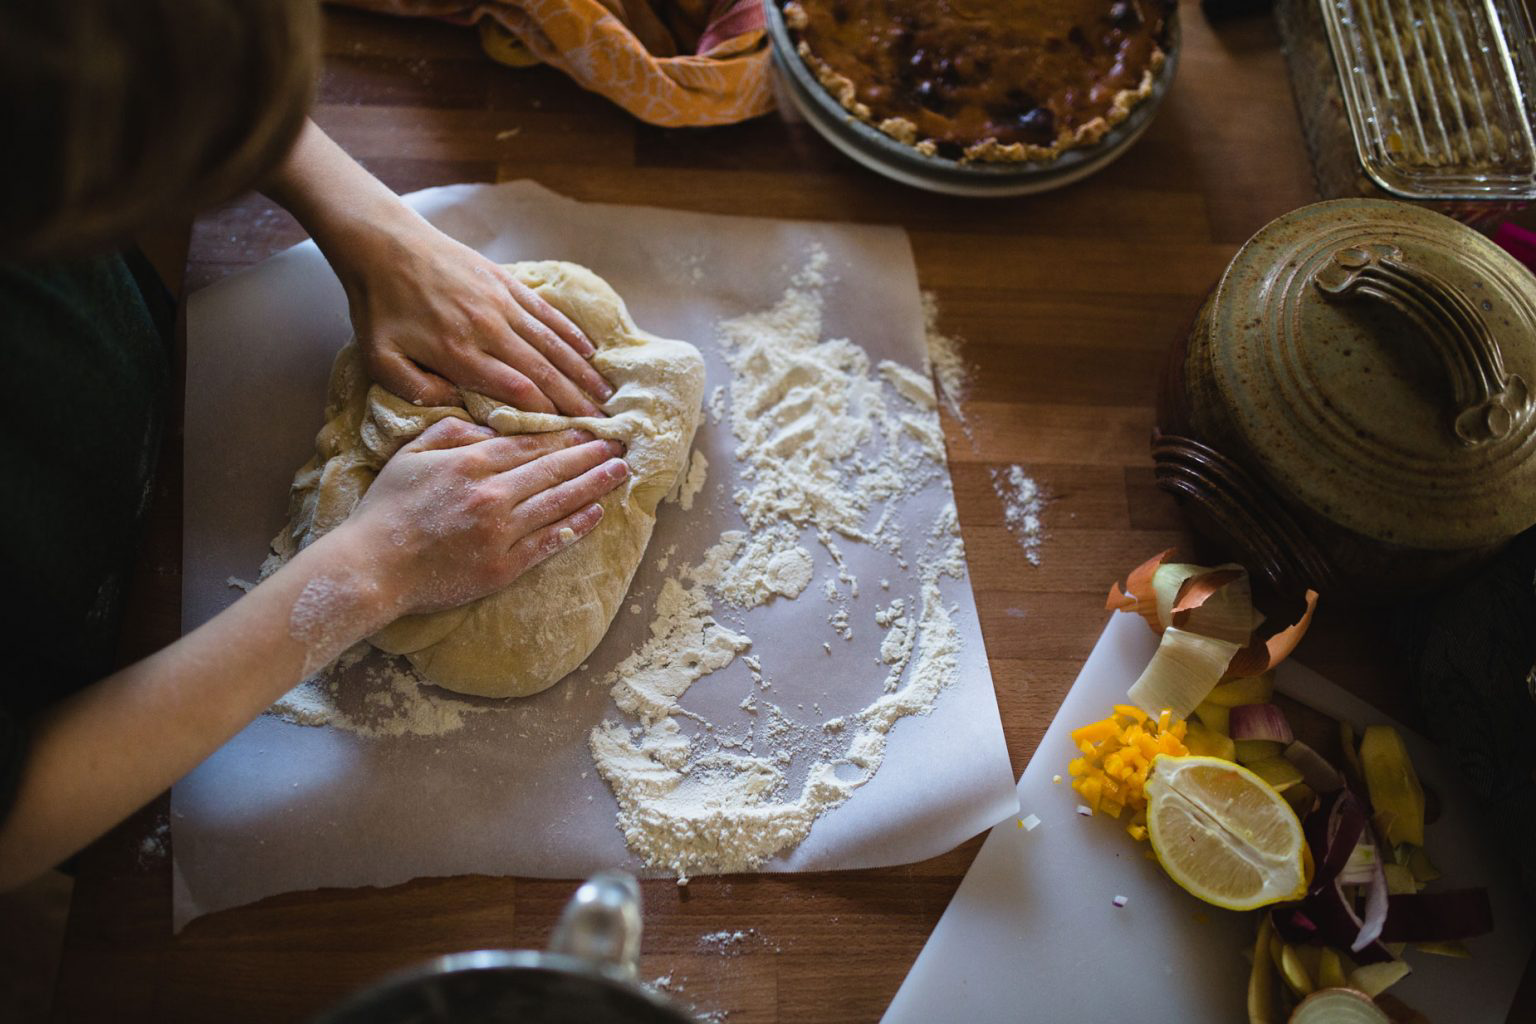 A person kneading dough with flour on a sheet of parchment paper.